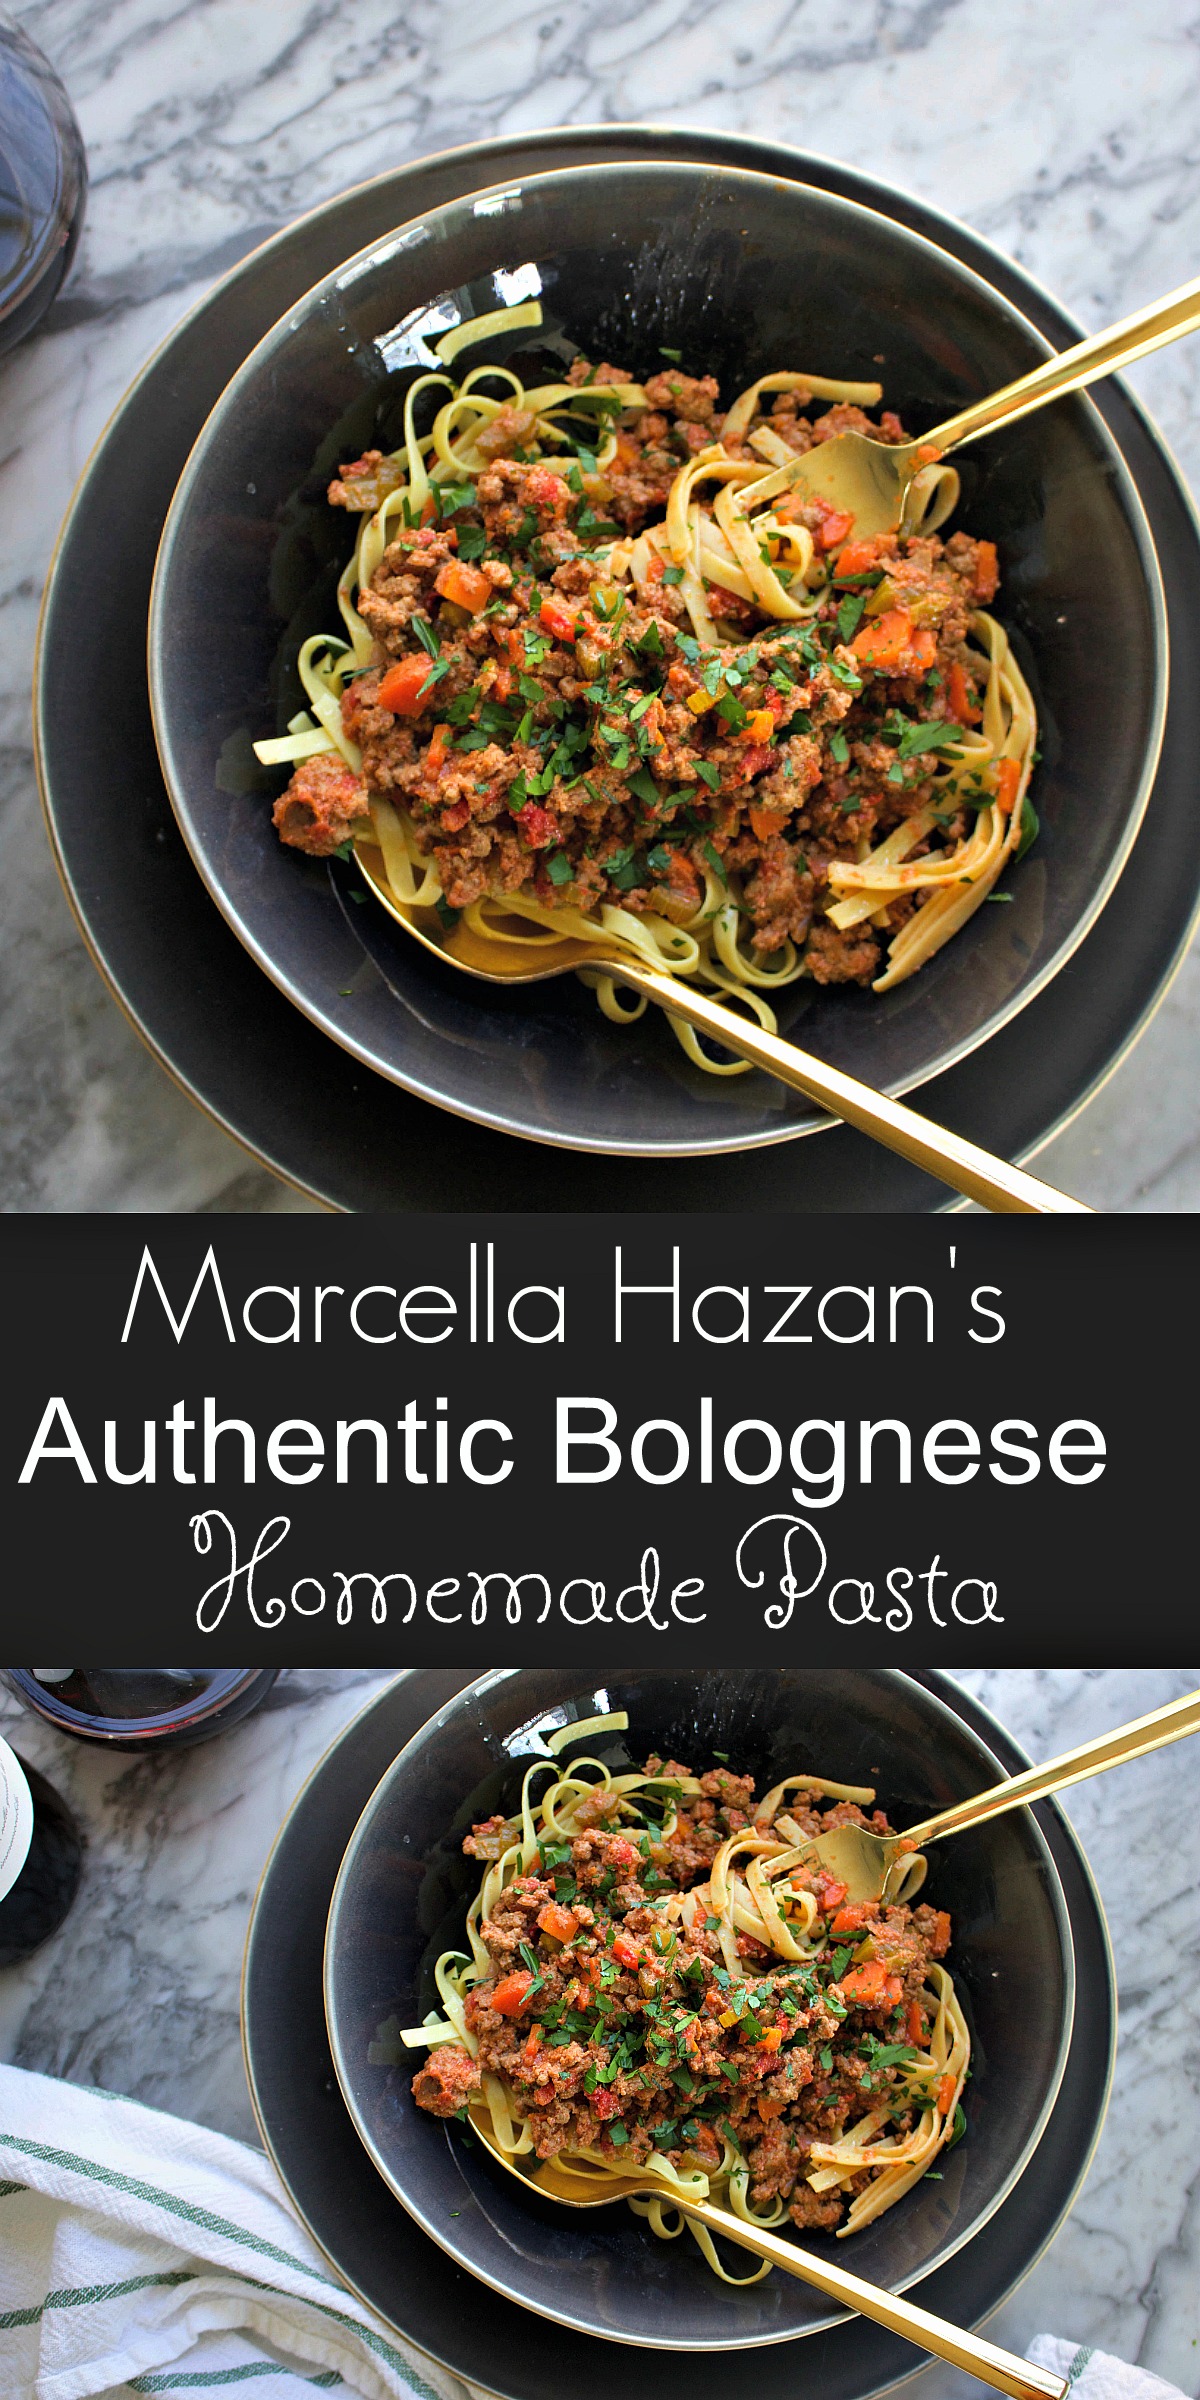 Marcella Hazan's Authentic Bolognese from Spinach Tiger